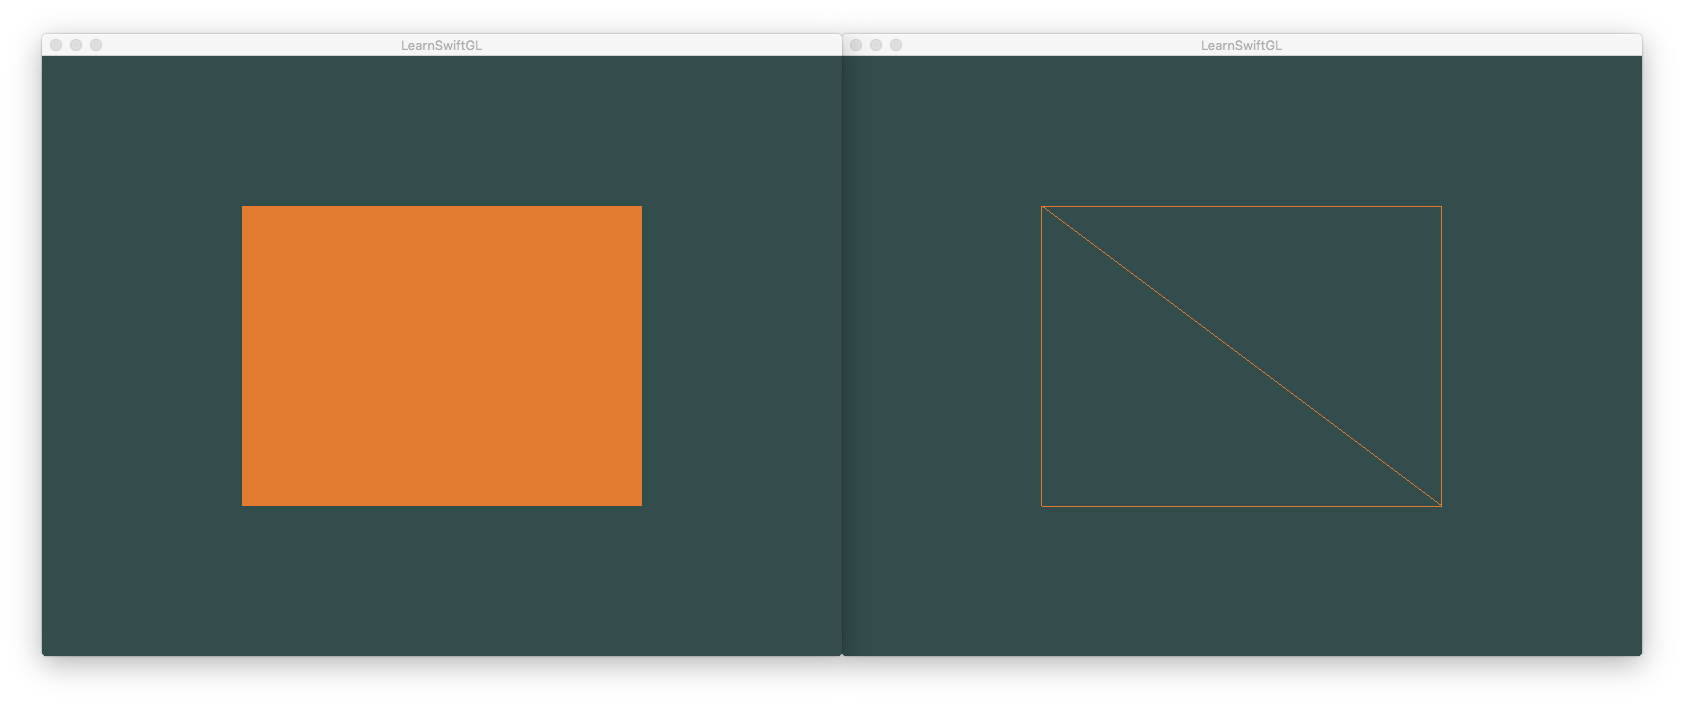 A rectangle drawn using indexed rendering in OpenGL